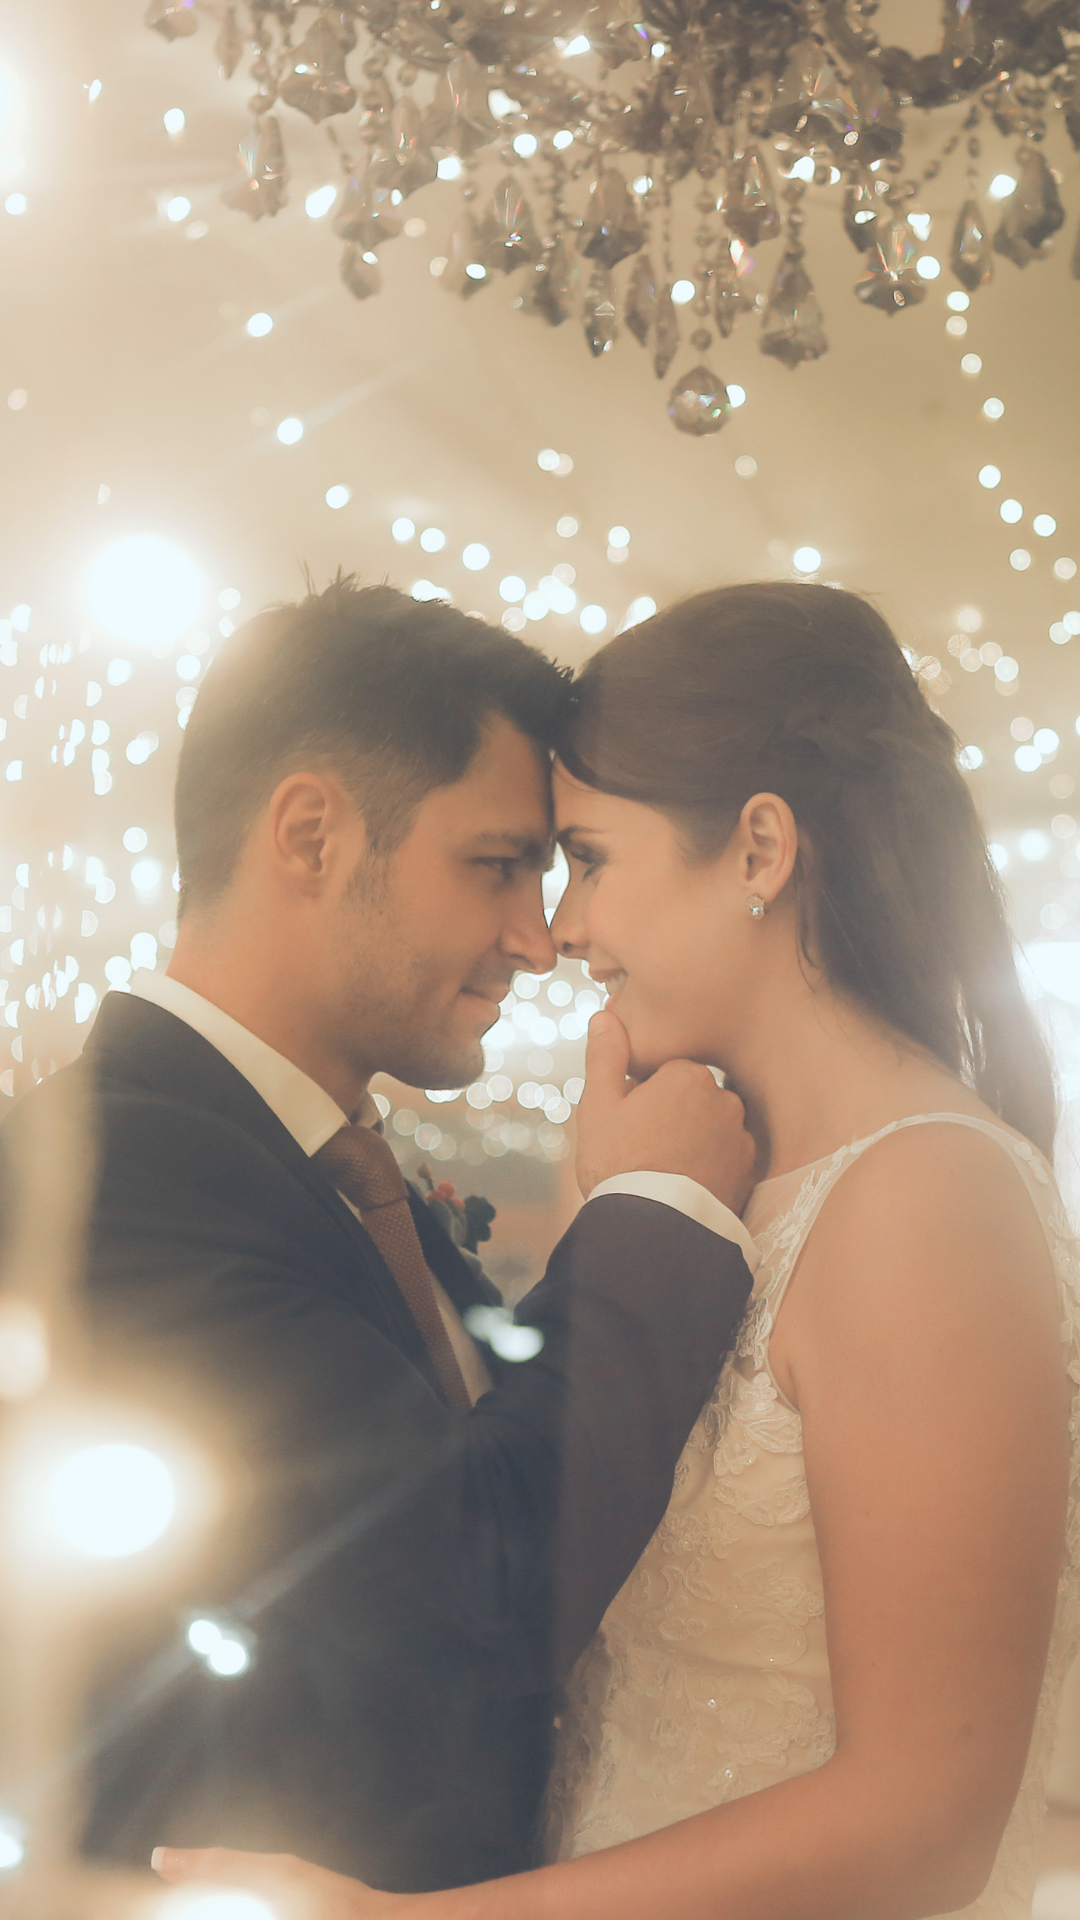 8 Ways to Make Your Wedding Day Special